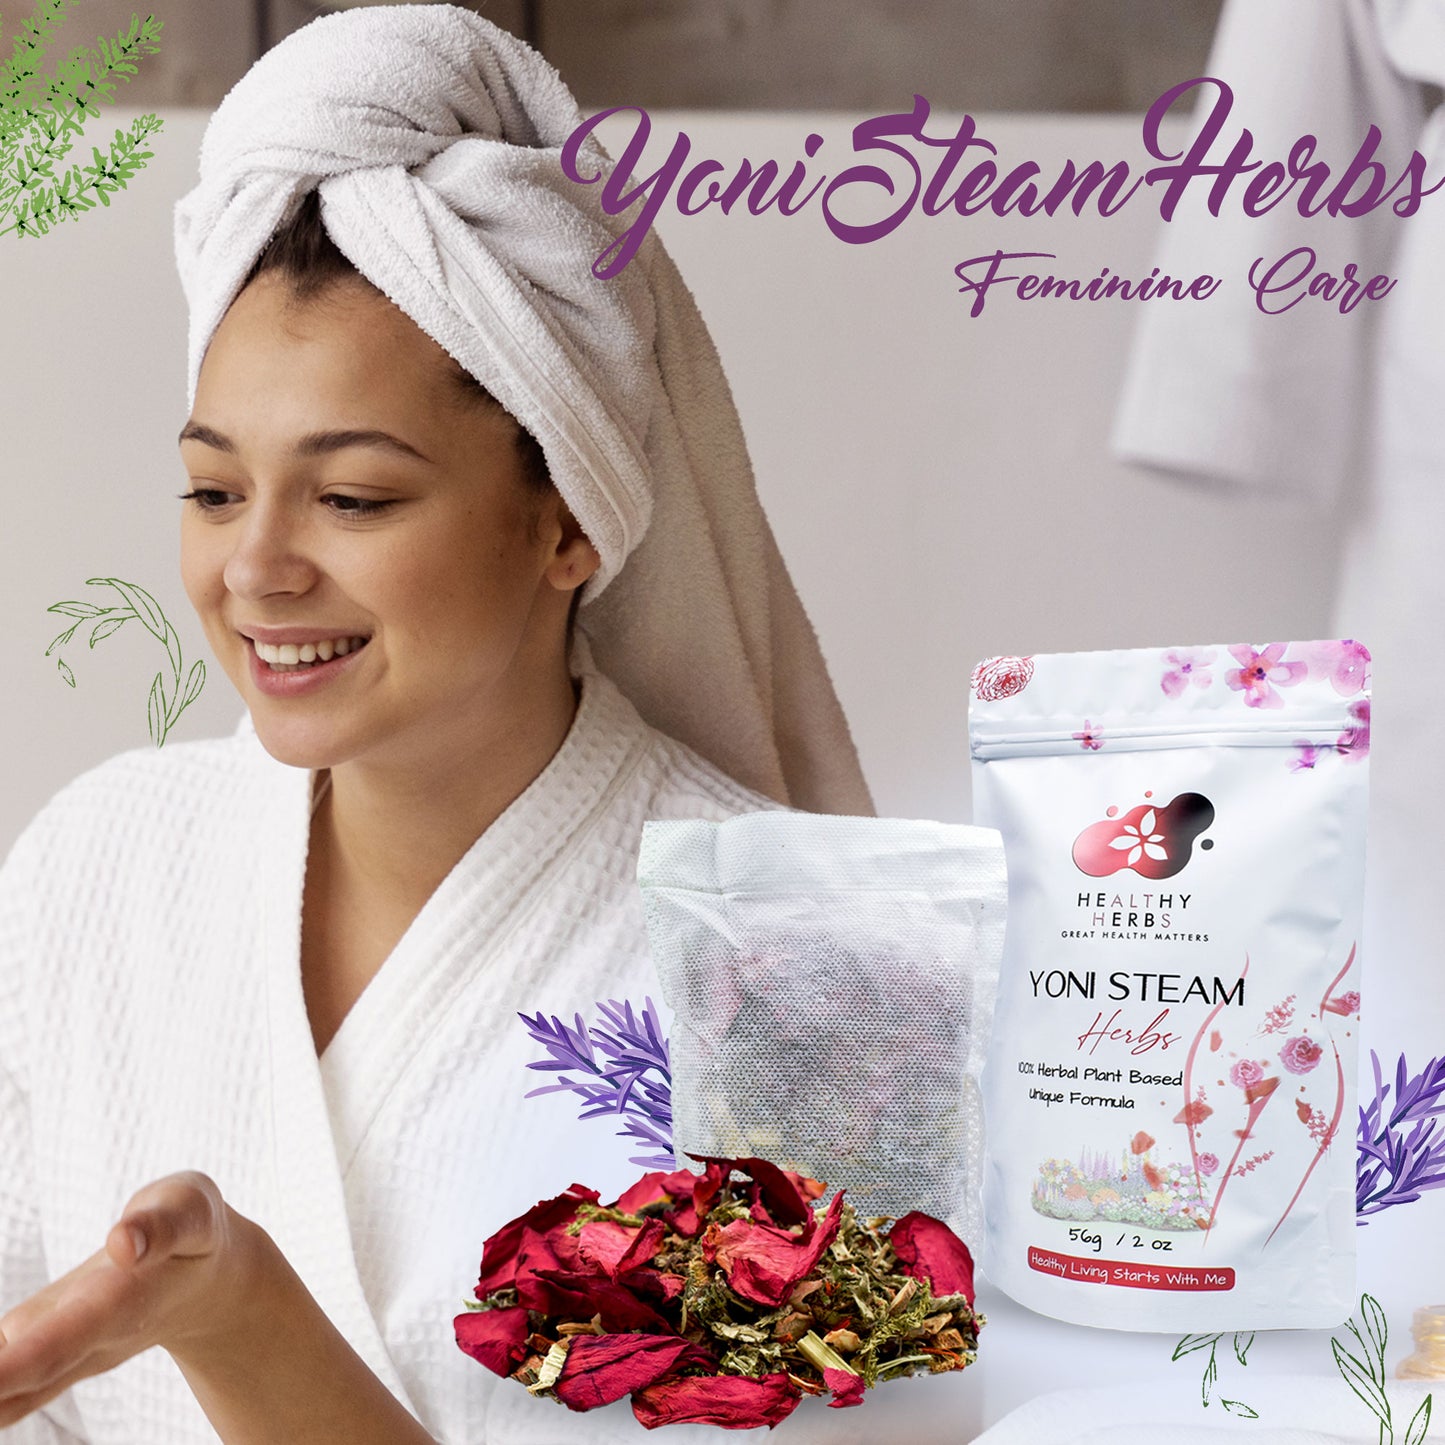 Healthy Herbs sea moss gel, yoni oils, feminine and herb products are made from 100% organic, plant based ingredients, vegan, gluten free, with no additives. Our seamoss gels are made from wildcrafted seamoss along the shorelines of Jamaica and St. Lucia